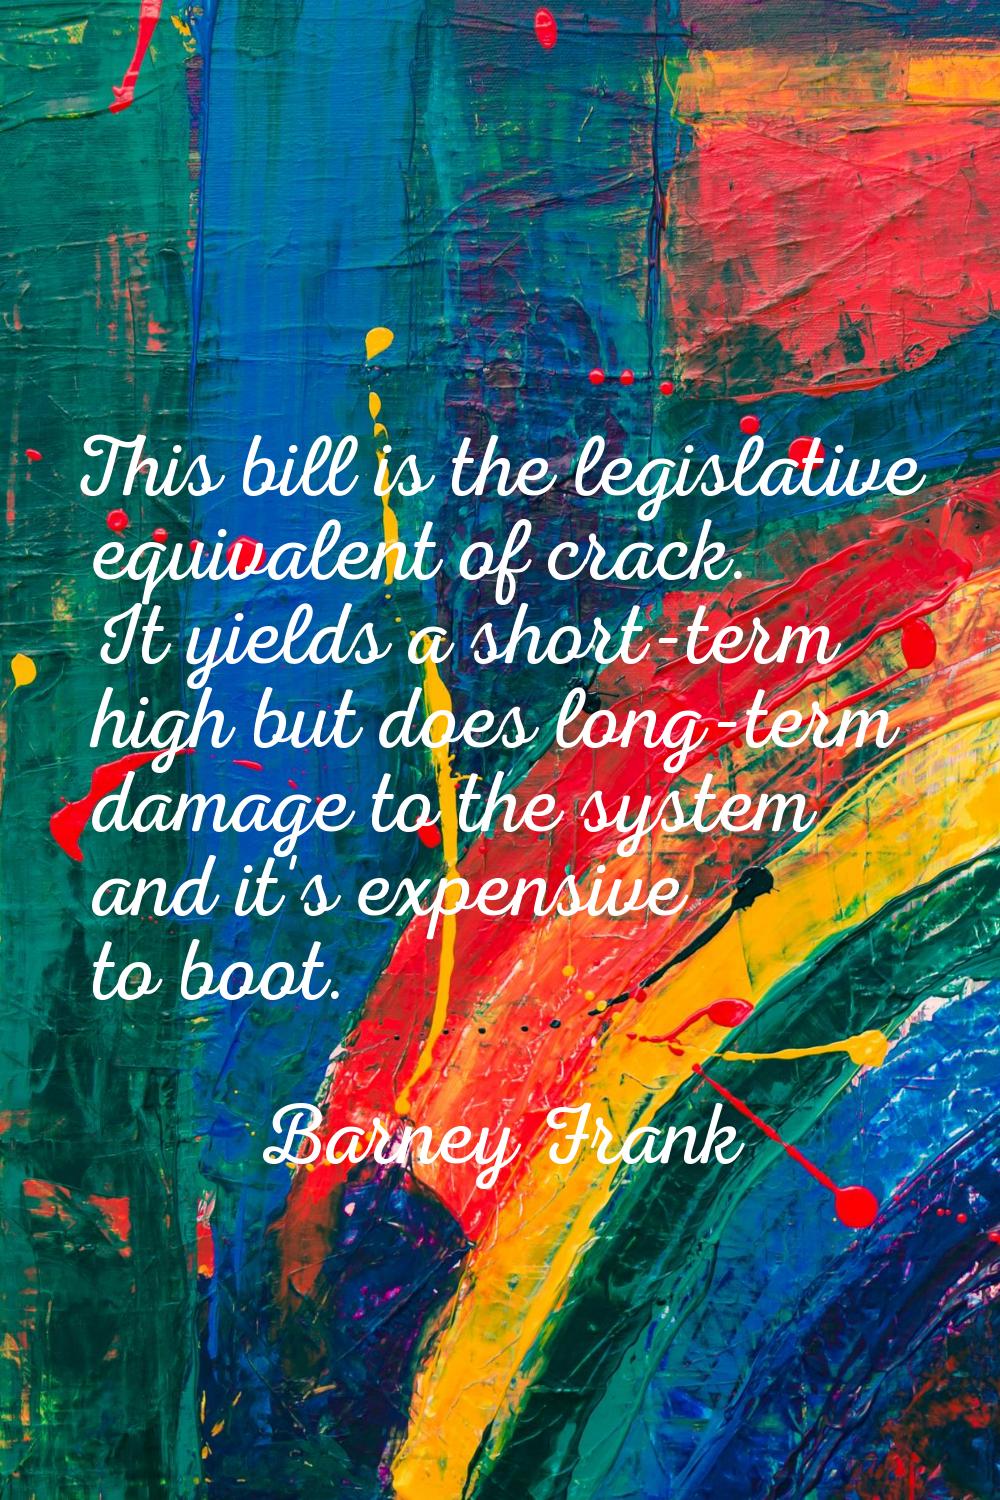 This bill is the legislative equivalent of crack. It yields a short-term high but does long-term da